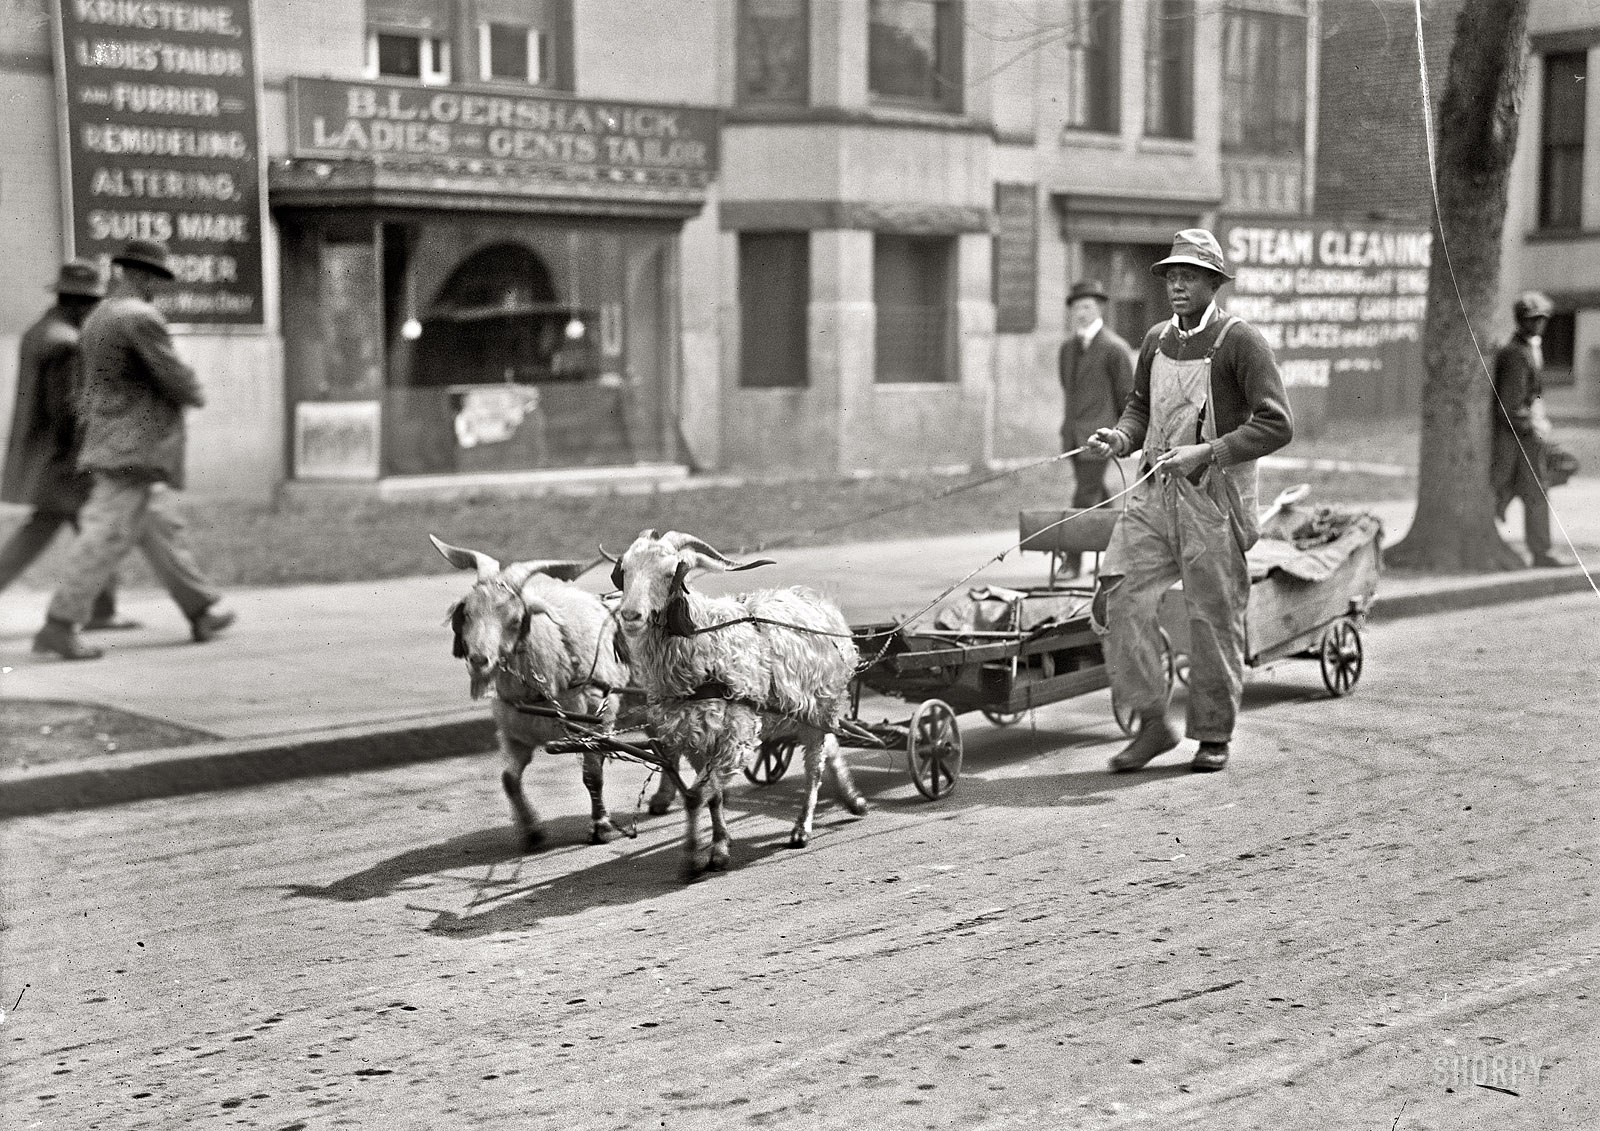 "Goat team." Washington, D.C., circa 1917. B.L. Gershanick, tailor, did business at 2150 P Street N.W. Harris & Ewing Collection glass negative. View full size.